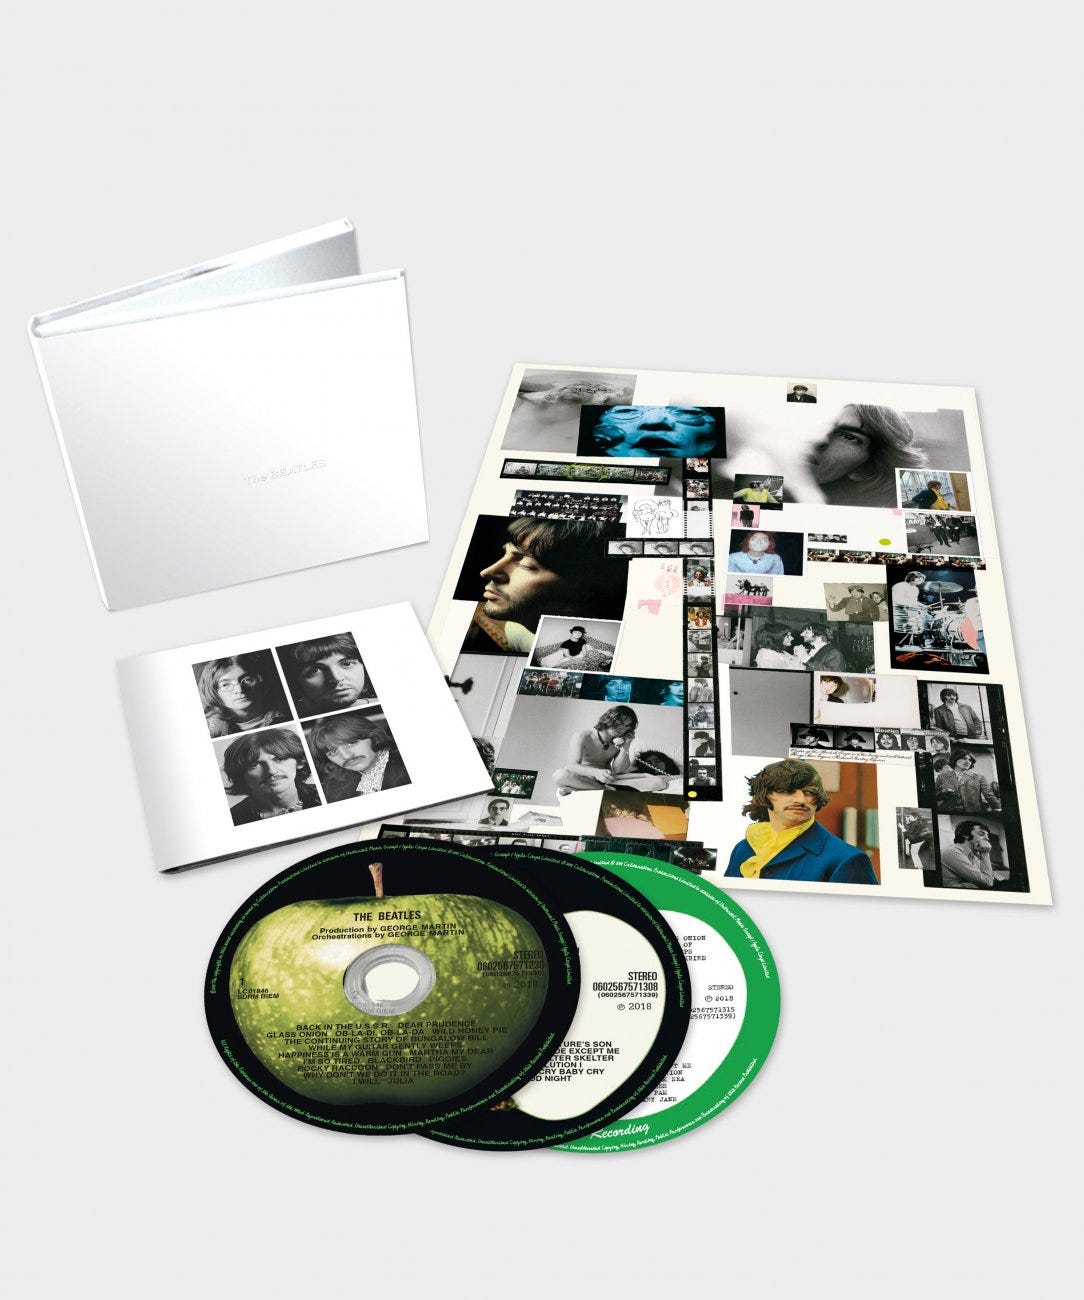 THE BEATLES CELEBRATE 'THE BEATLES' ('WHITE ALBUM') WITH SPECIAL  ANNIVERSARY RELEASES | The Beatles